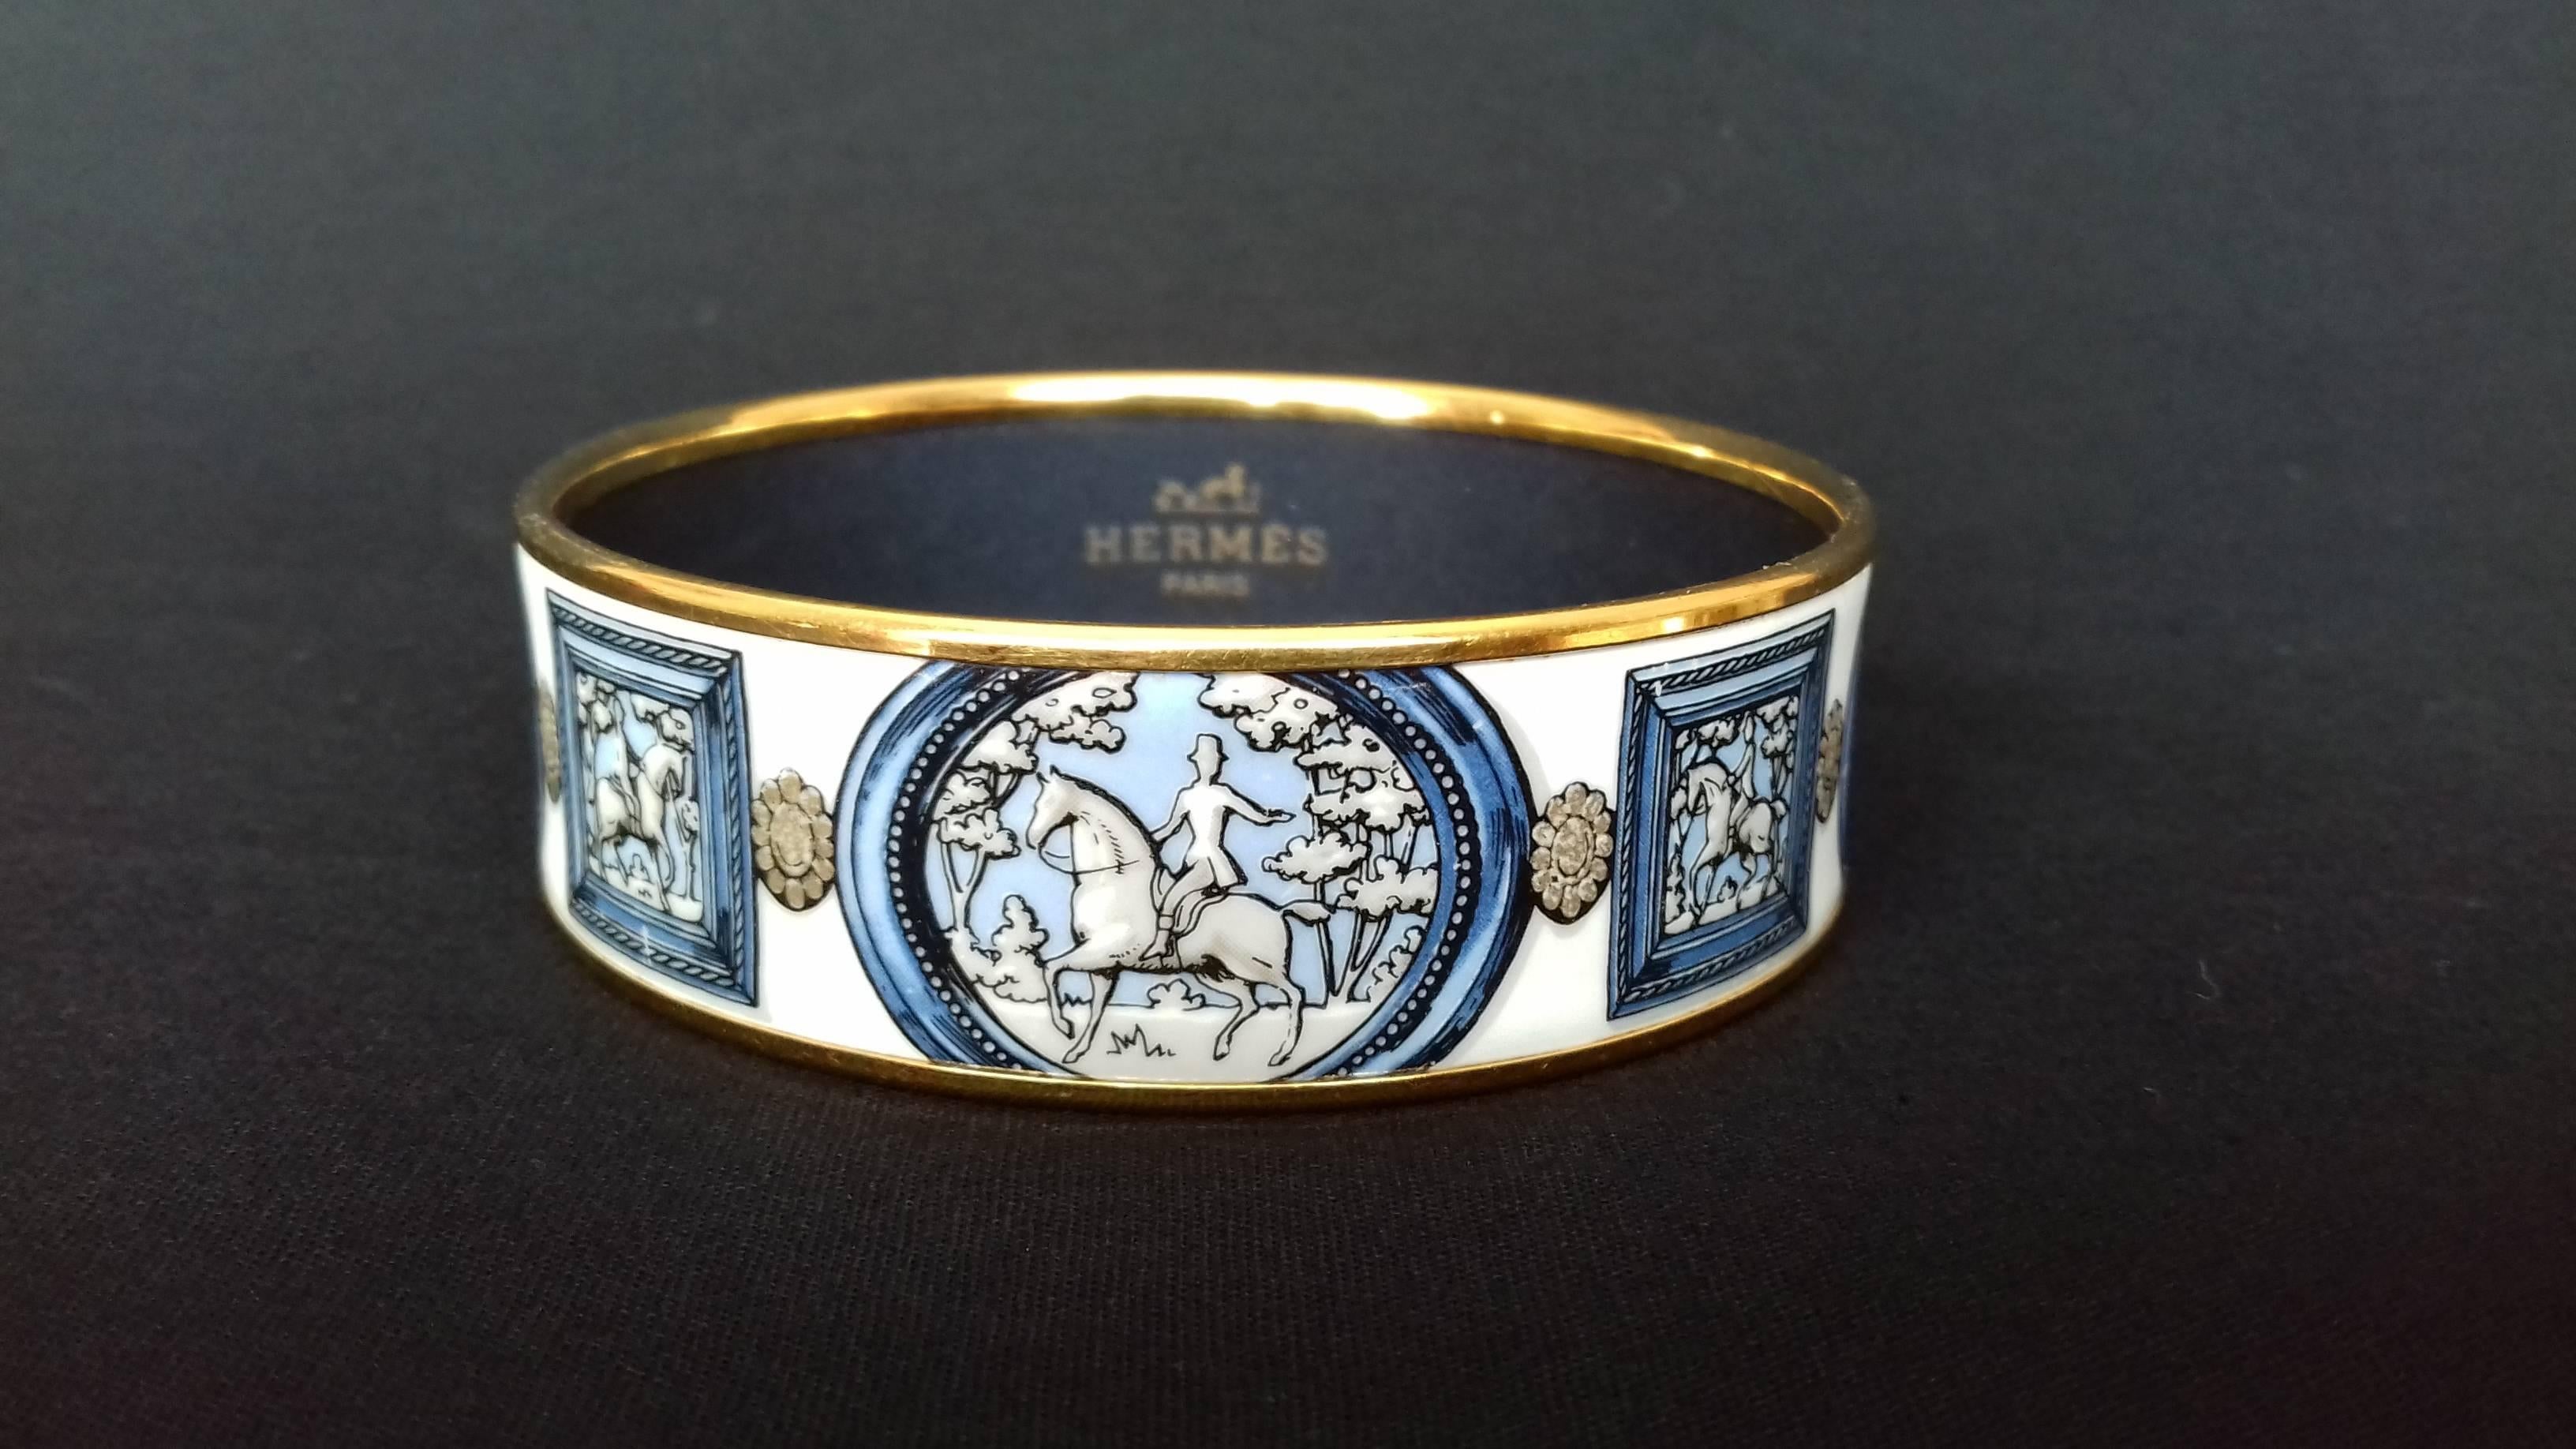 This is the first time that I come across this pattern in bracelet. 

It is so so rare and so gorgeous !

Here is an authentic vintage Hermès Bracelet

Pattern: 